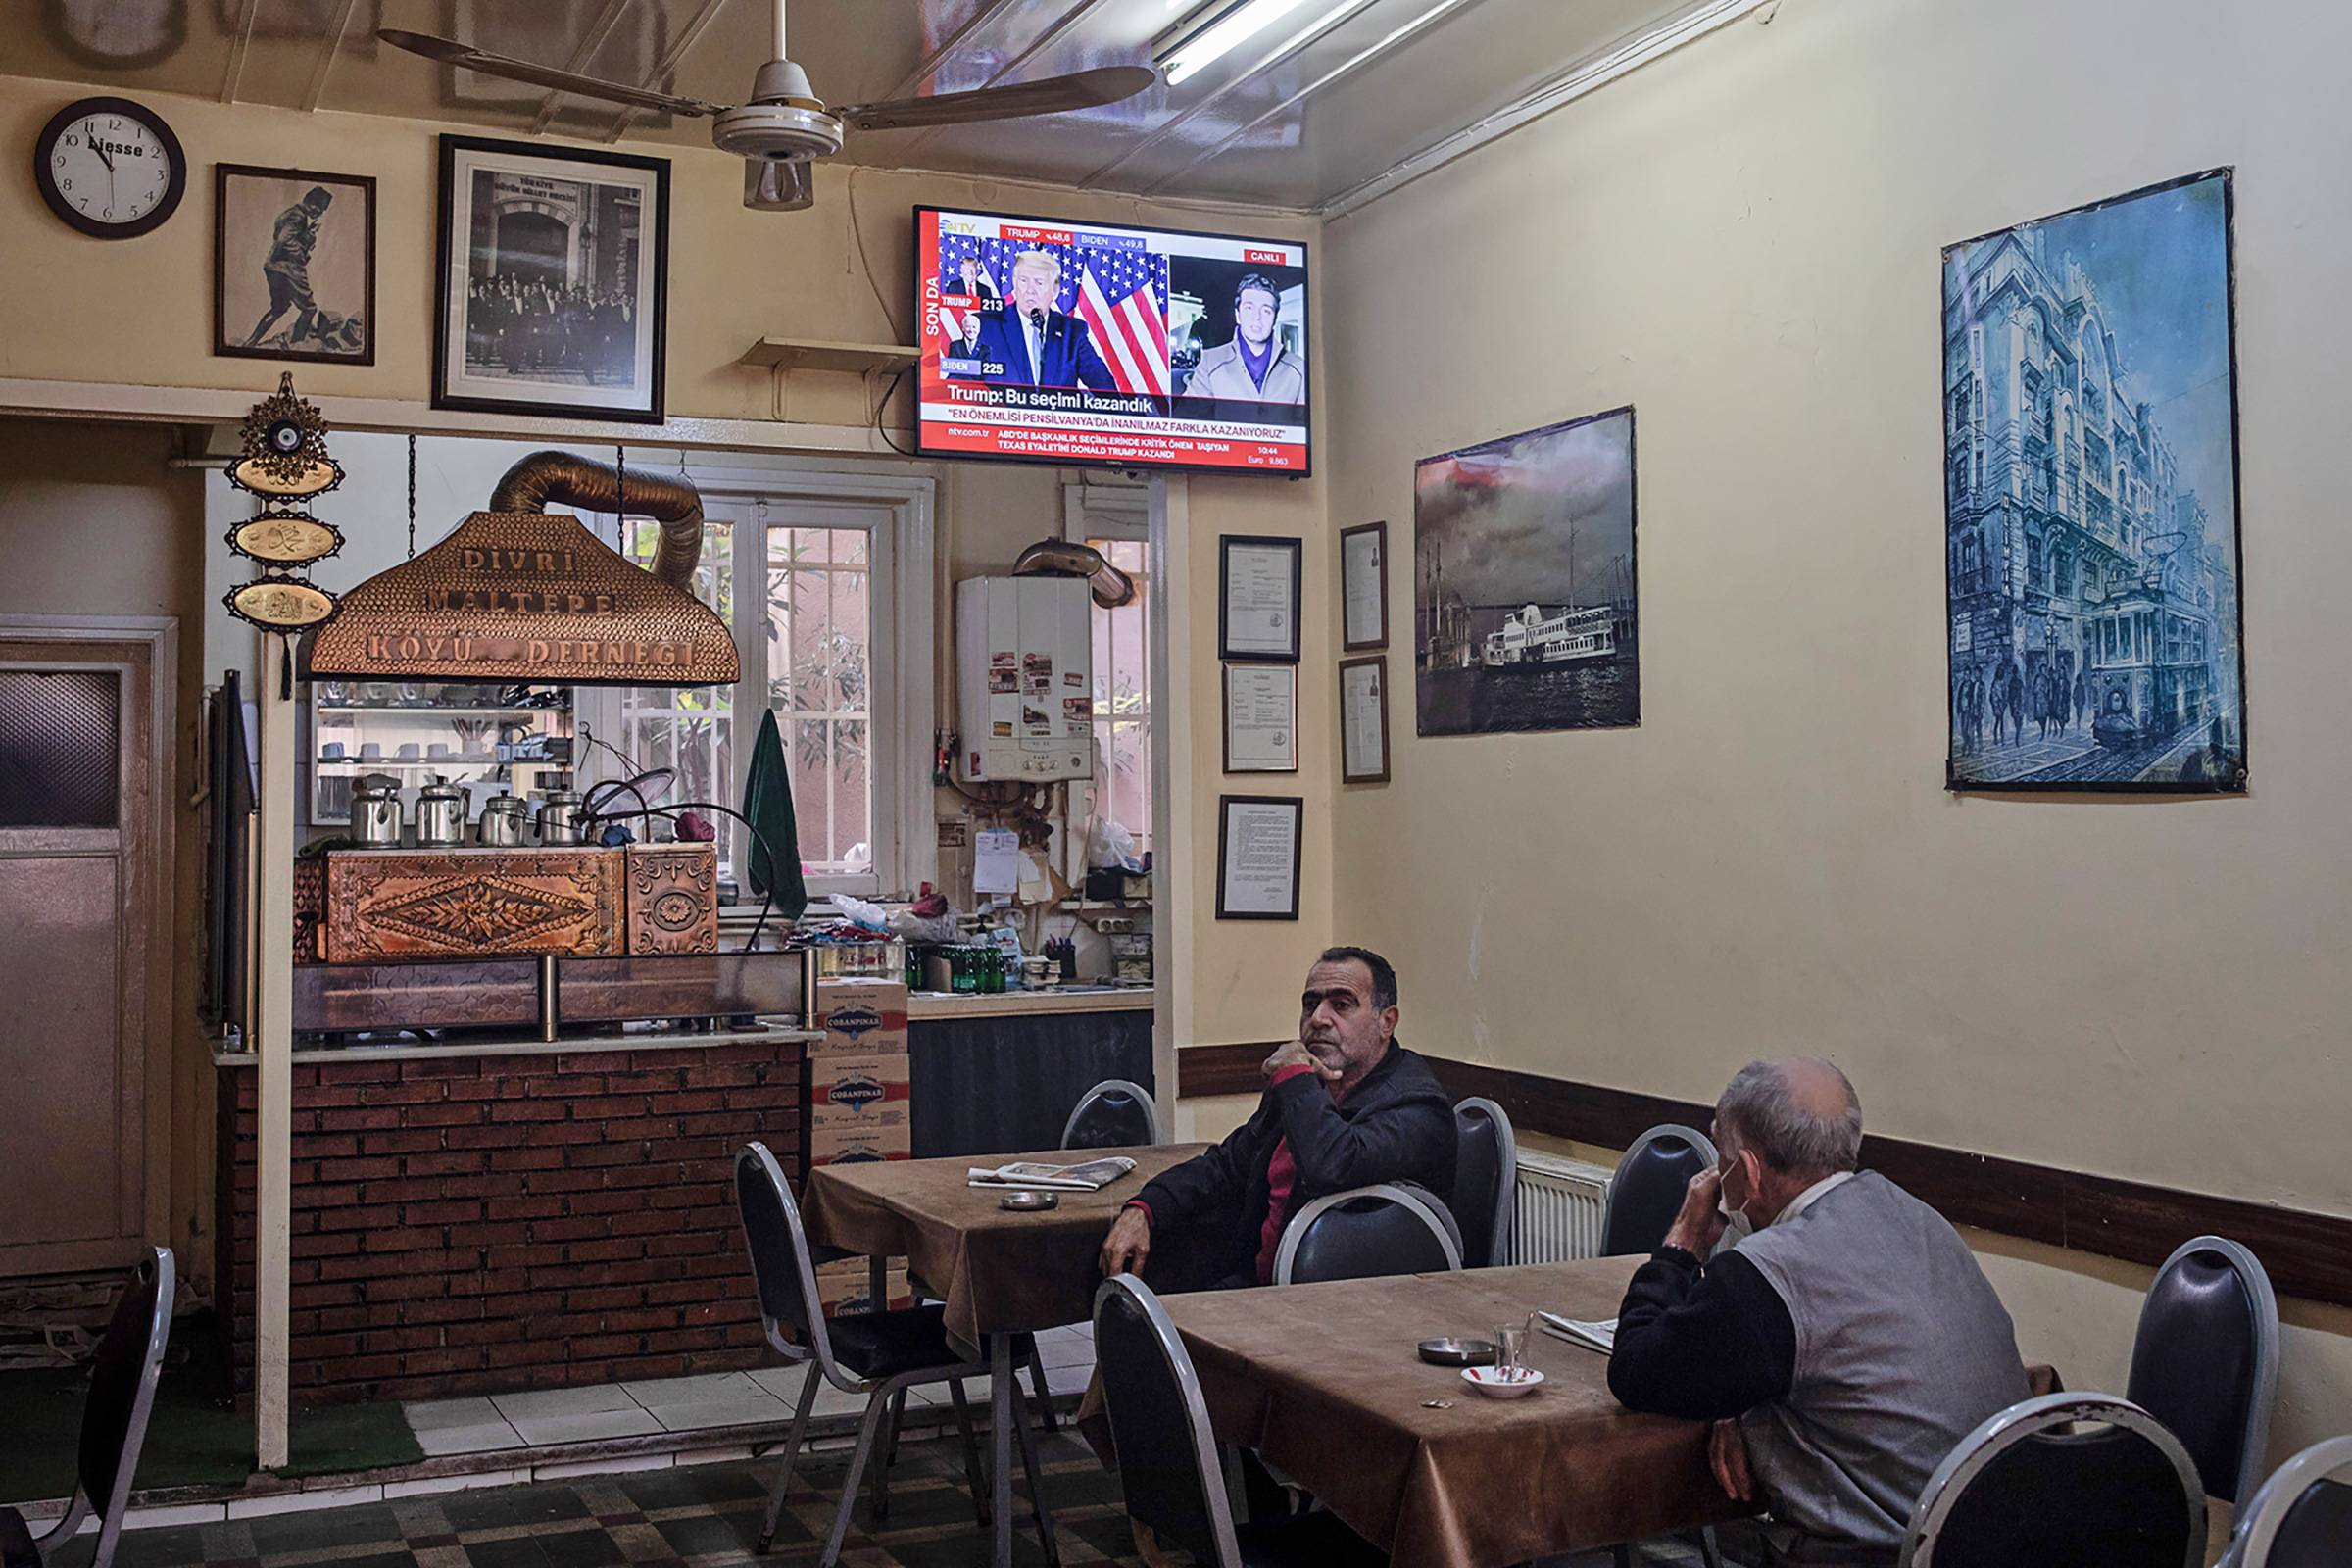 Tea drinkers in Istanbul watch one of President Trump’s press conferences